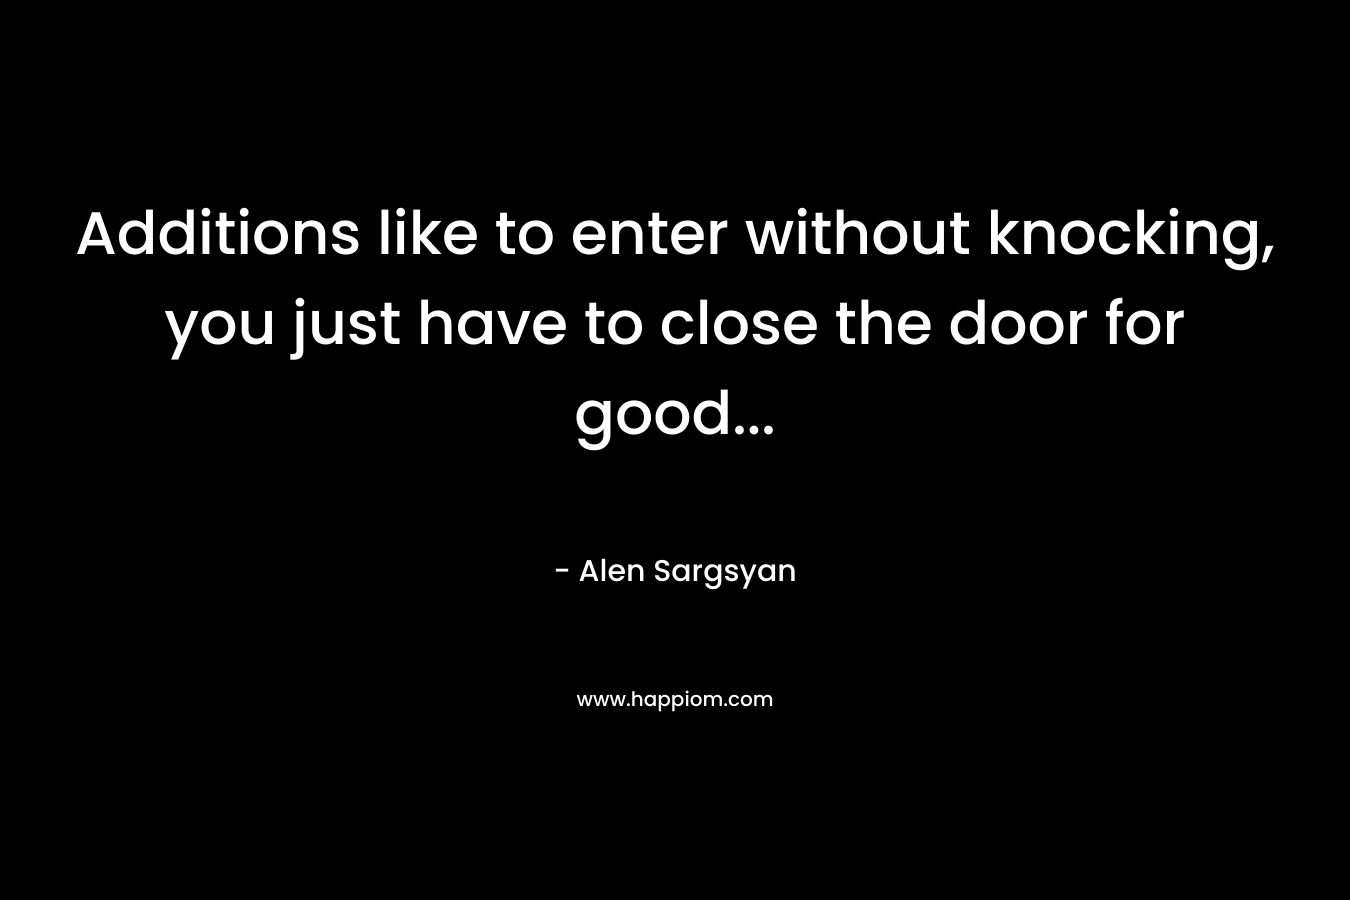 Additions like to enter without knocking, you just have to close the door for good...